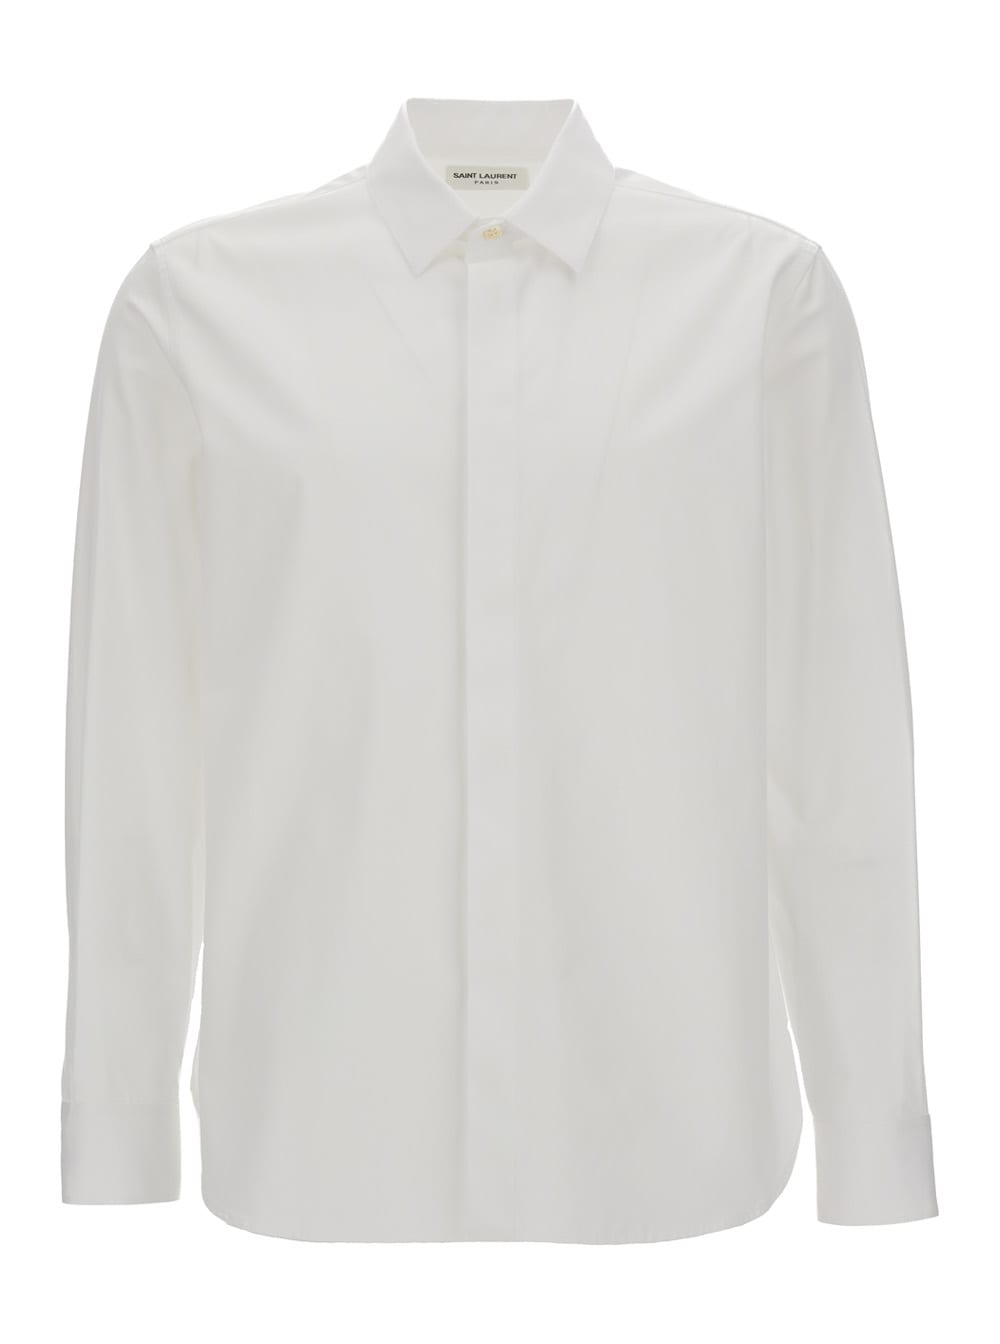 SAINT LAURENT WHITE POINTED COLLAR LONG SLEEVE SHIRT IN COTTON MAN